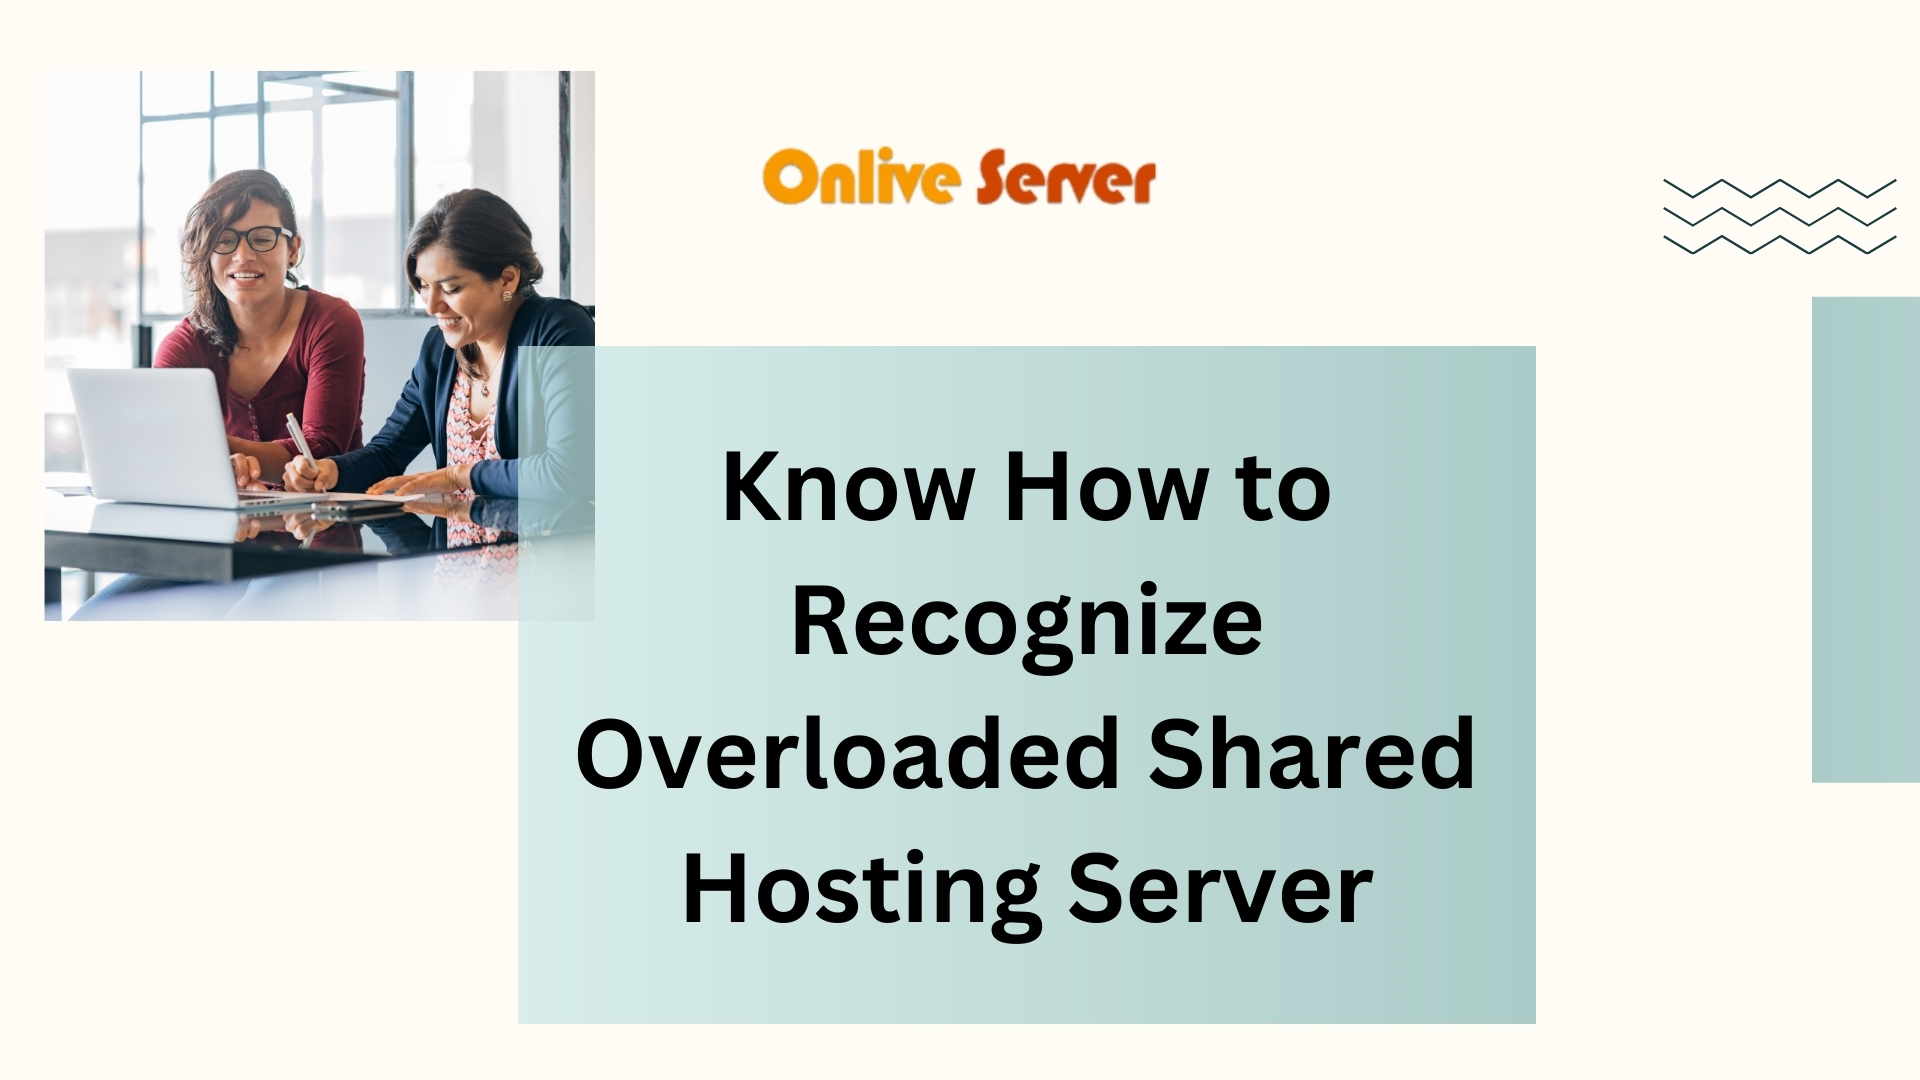 Know How to Recognize Overloaded Shared Hosting Server